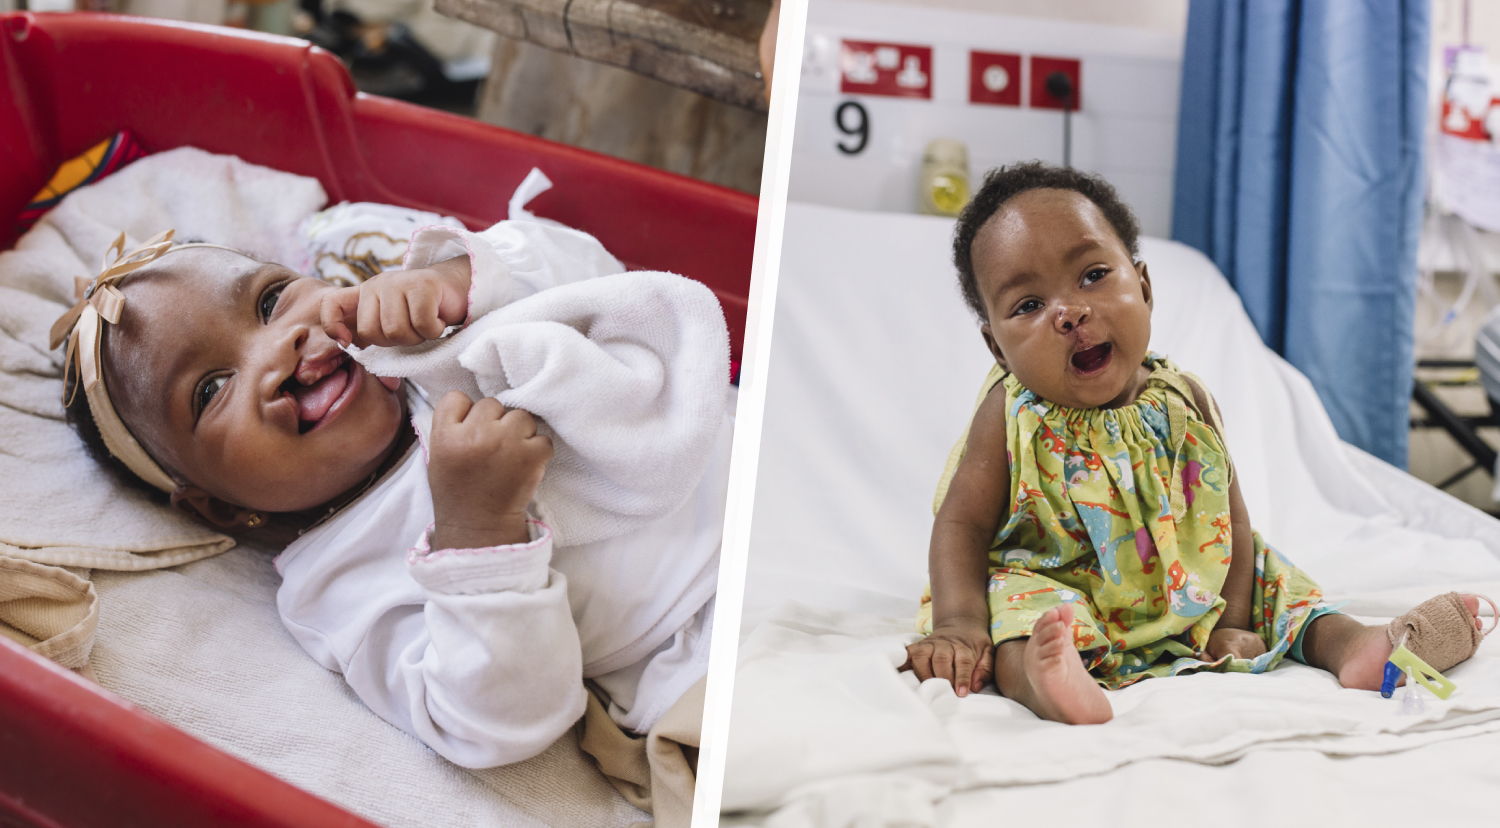 Before and after photos of Aissata's cleft lip surgery.